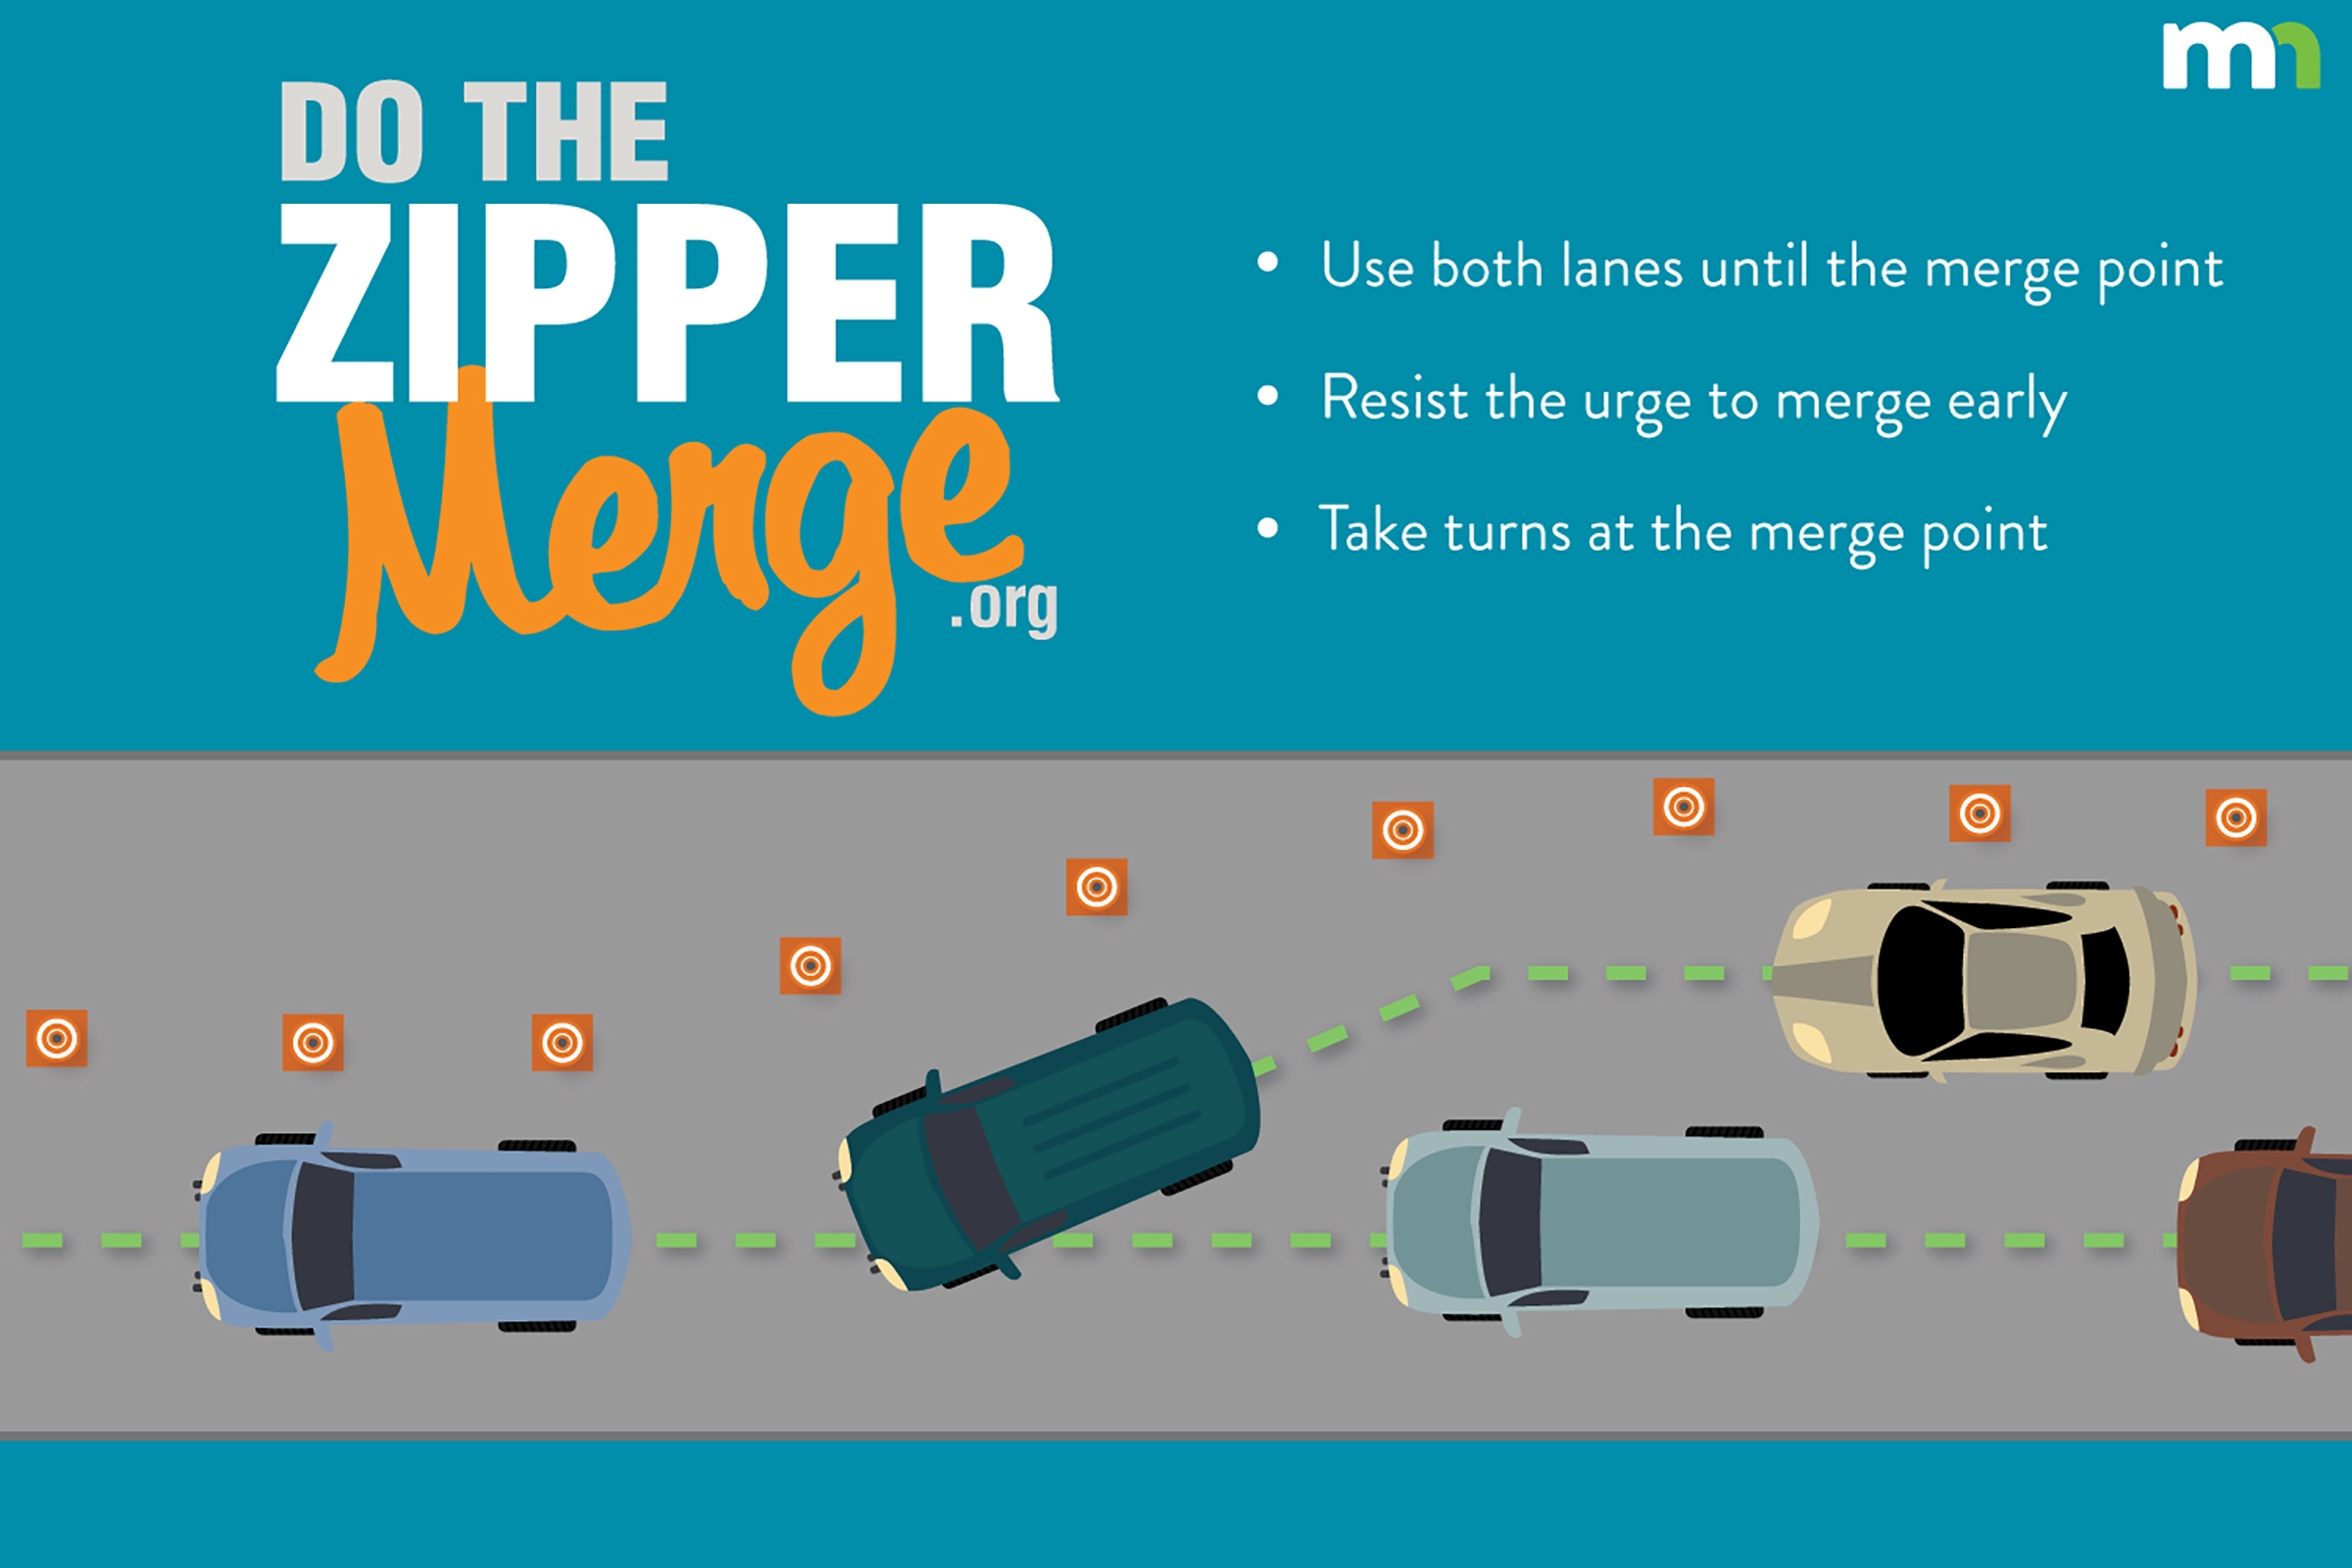 Do the Zipper Merge: Use both lanes until the merge point; resist the urge to merge early; take turns at the merge point